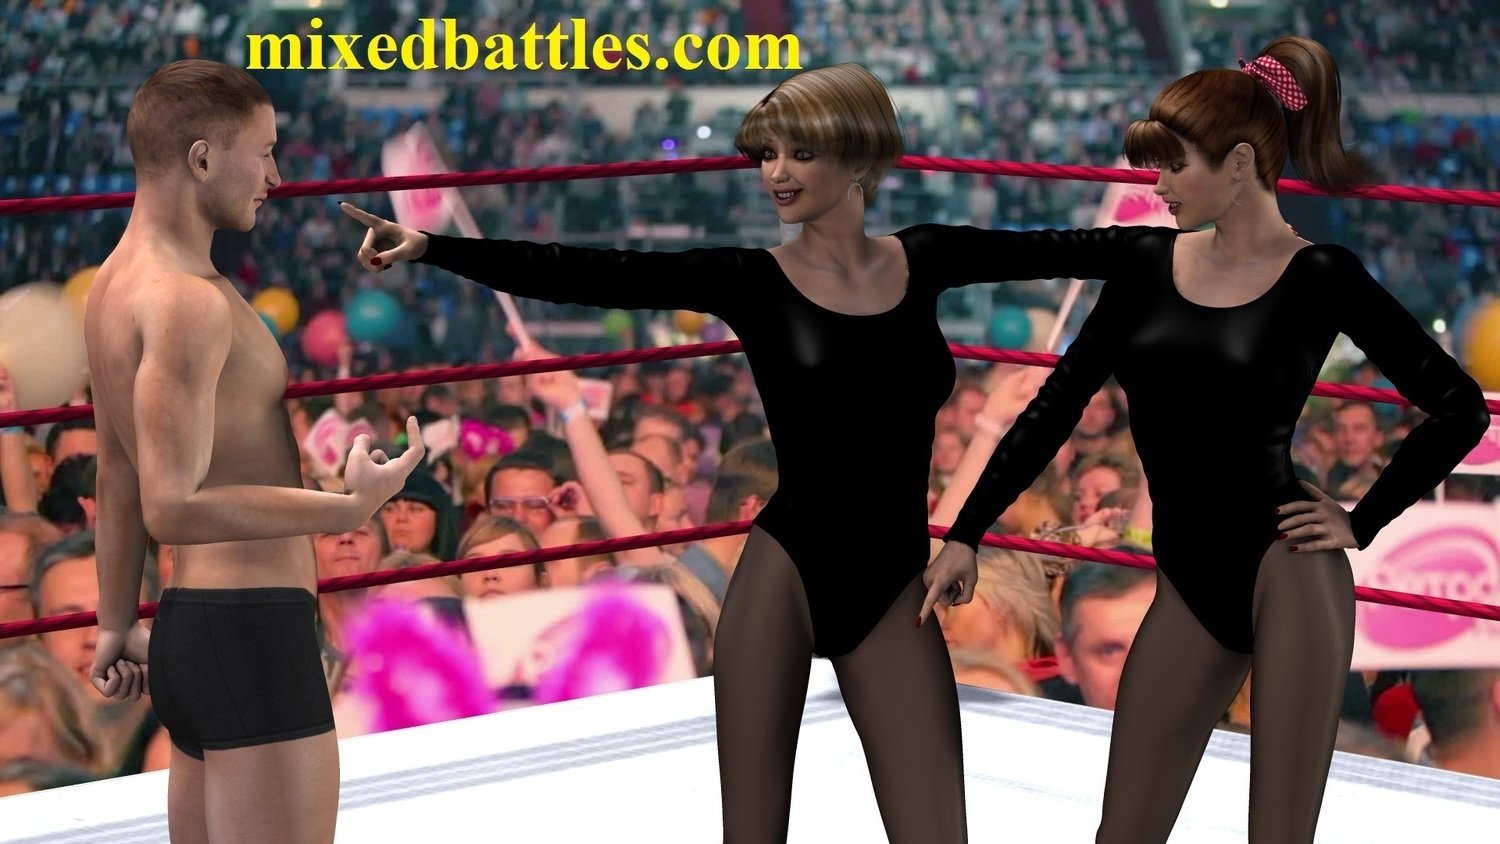 tag team mixed wrestling 2 on 1 female domination two gymnast leotard girls attack their male opponent